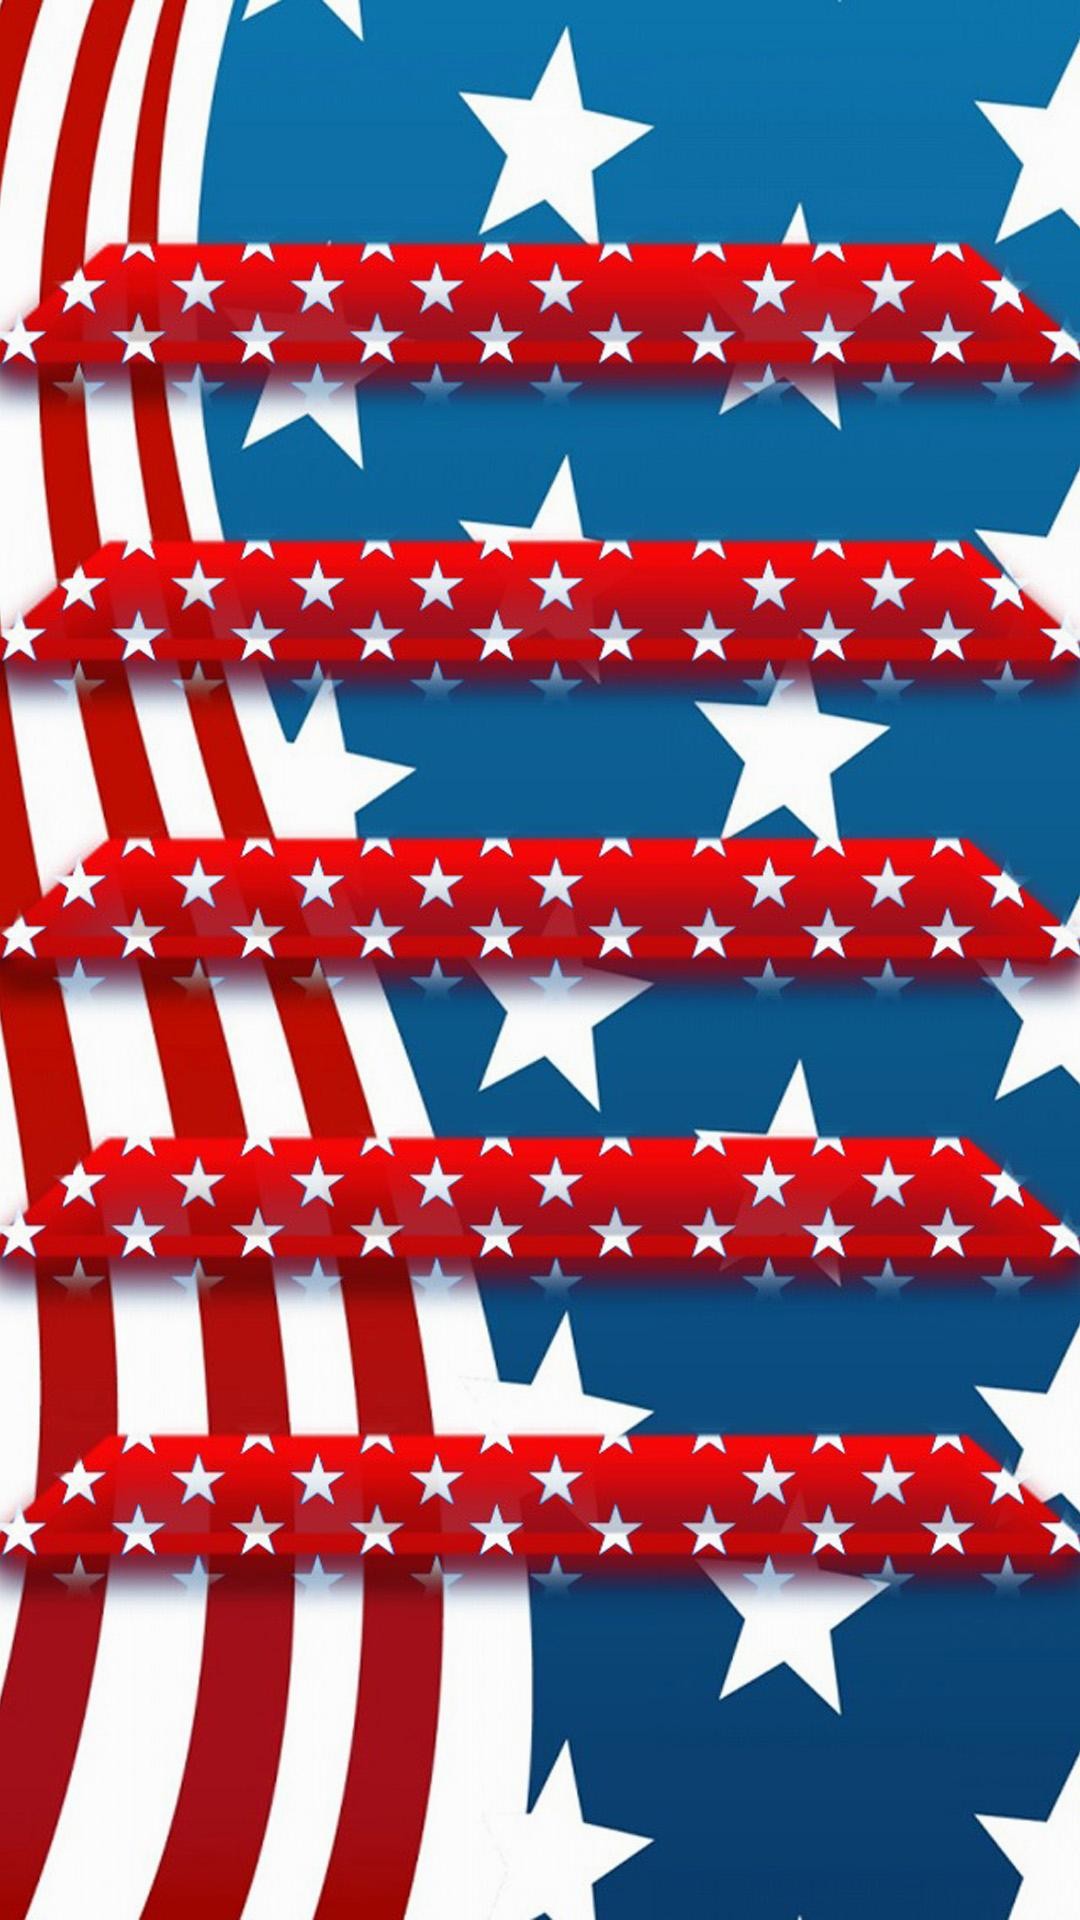 Wallpaper.wiki Cool American Flag Iphone Background PIC